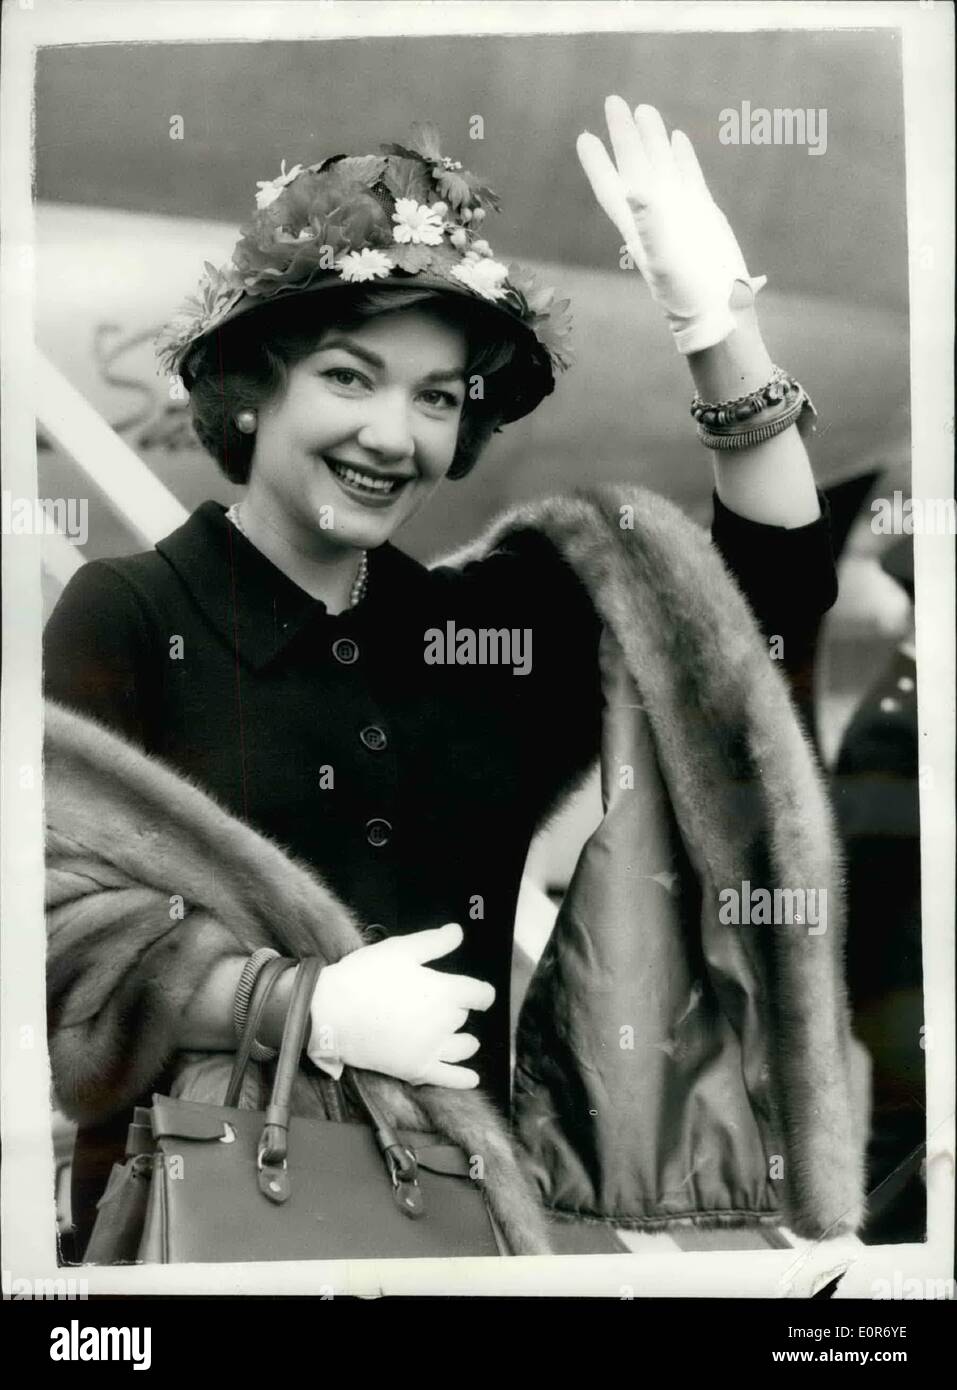 May 05, 1958 - Anne Baxter Arrives In London To Star In Stage Play: Among the arrivals at London airport from the United States Stock Photo